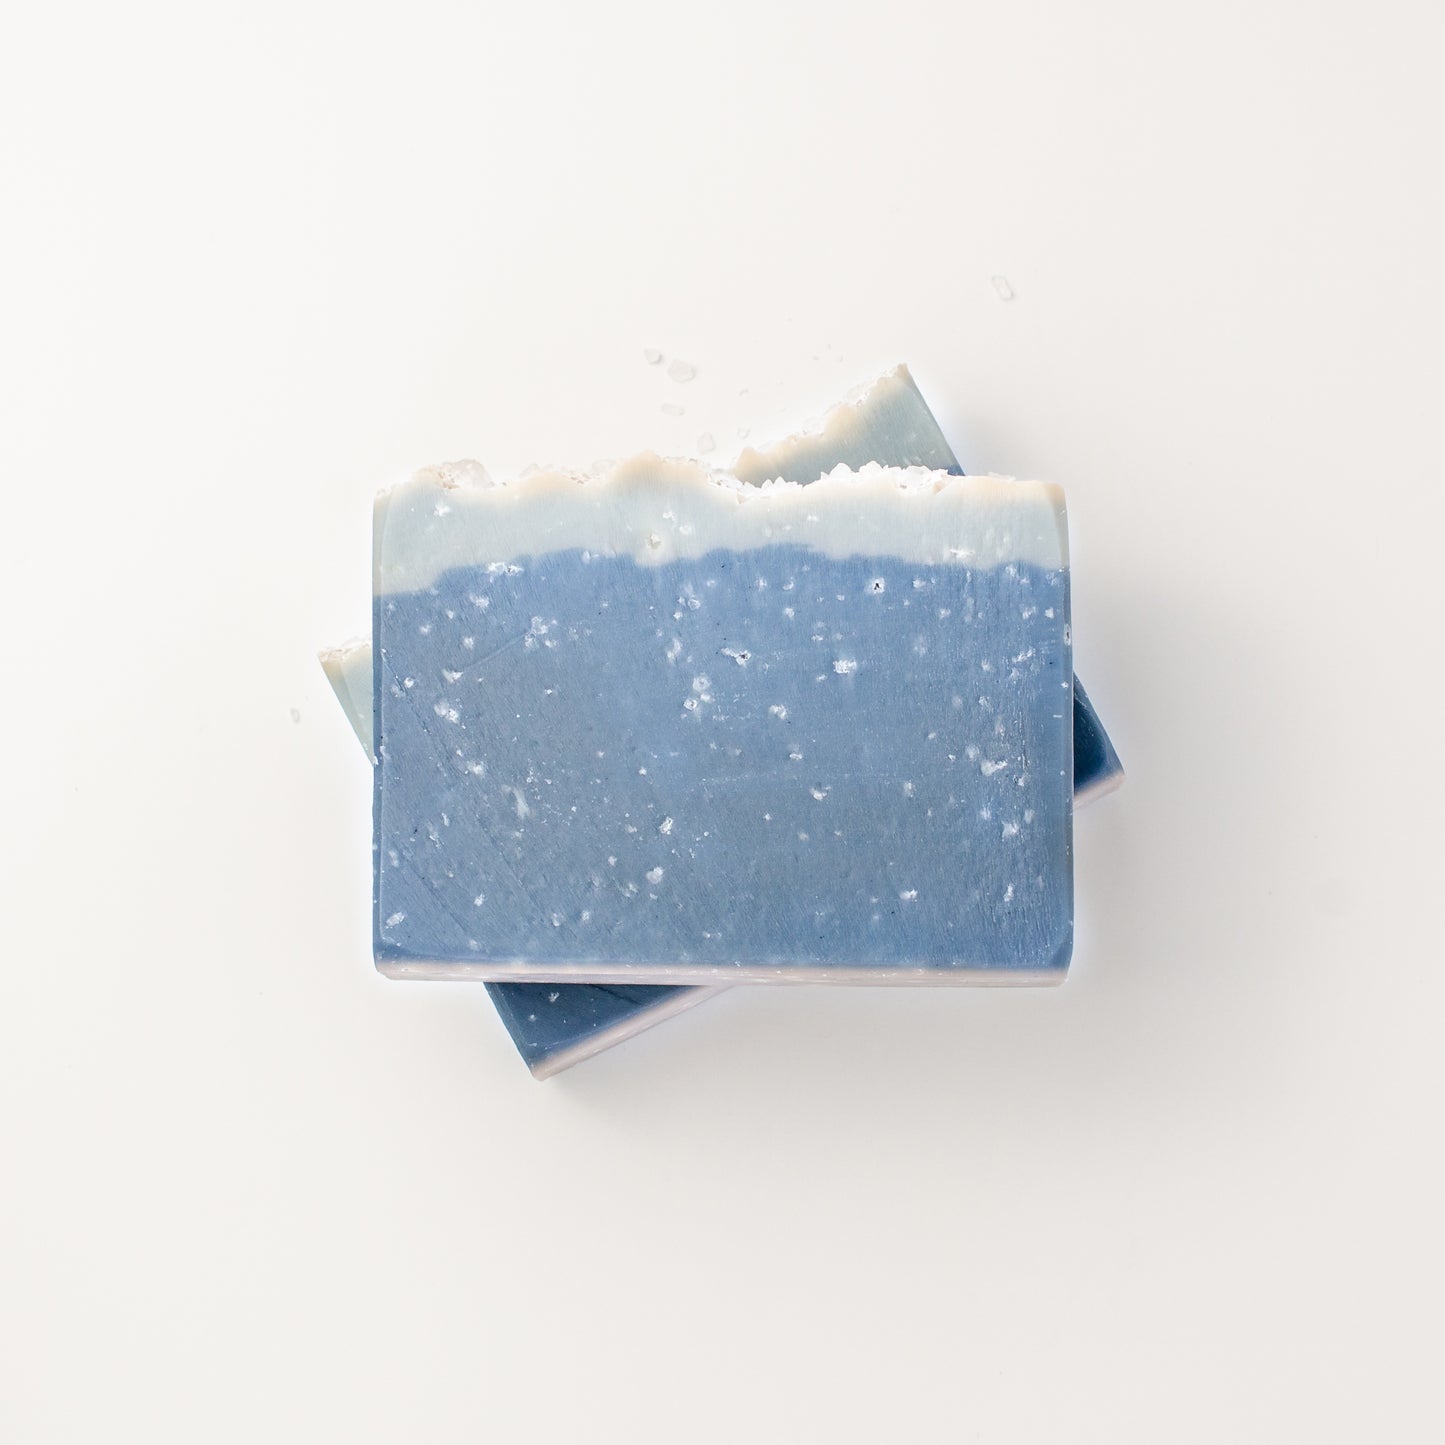 Sea salt soleseife soap with lavender, cypress and peppermint side